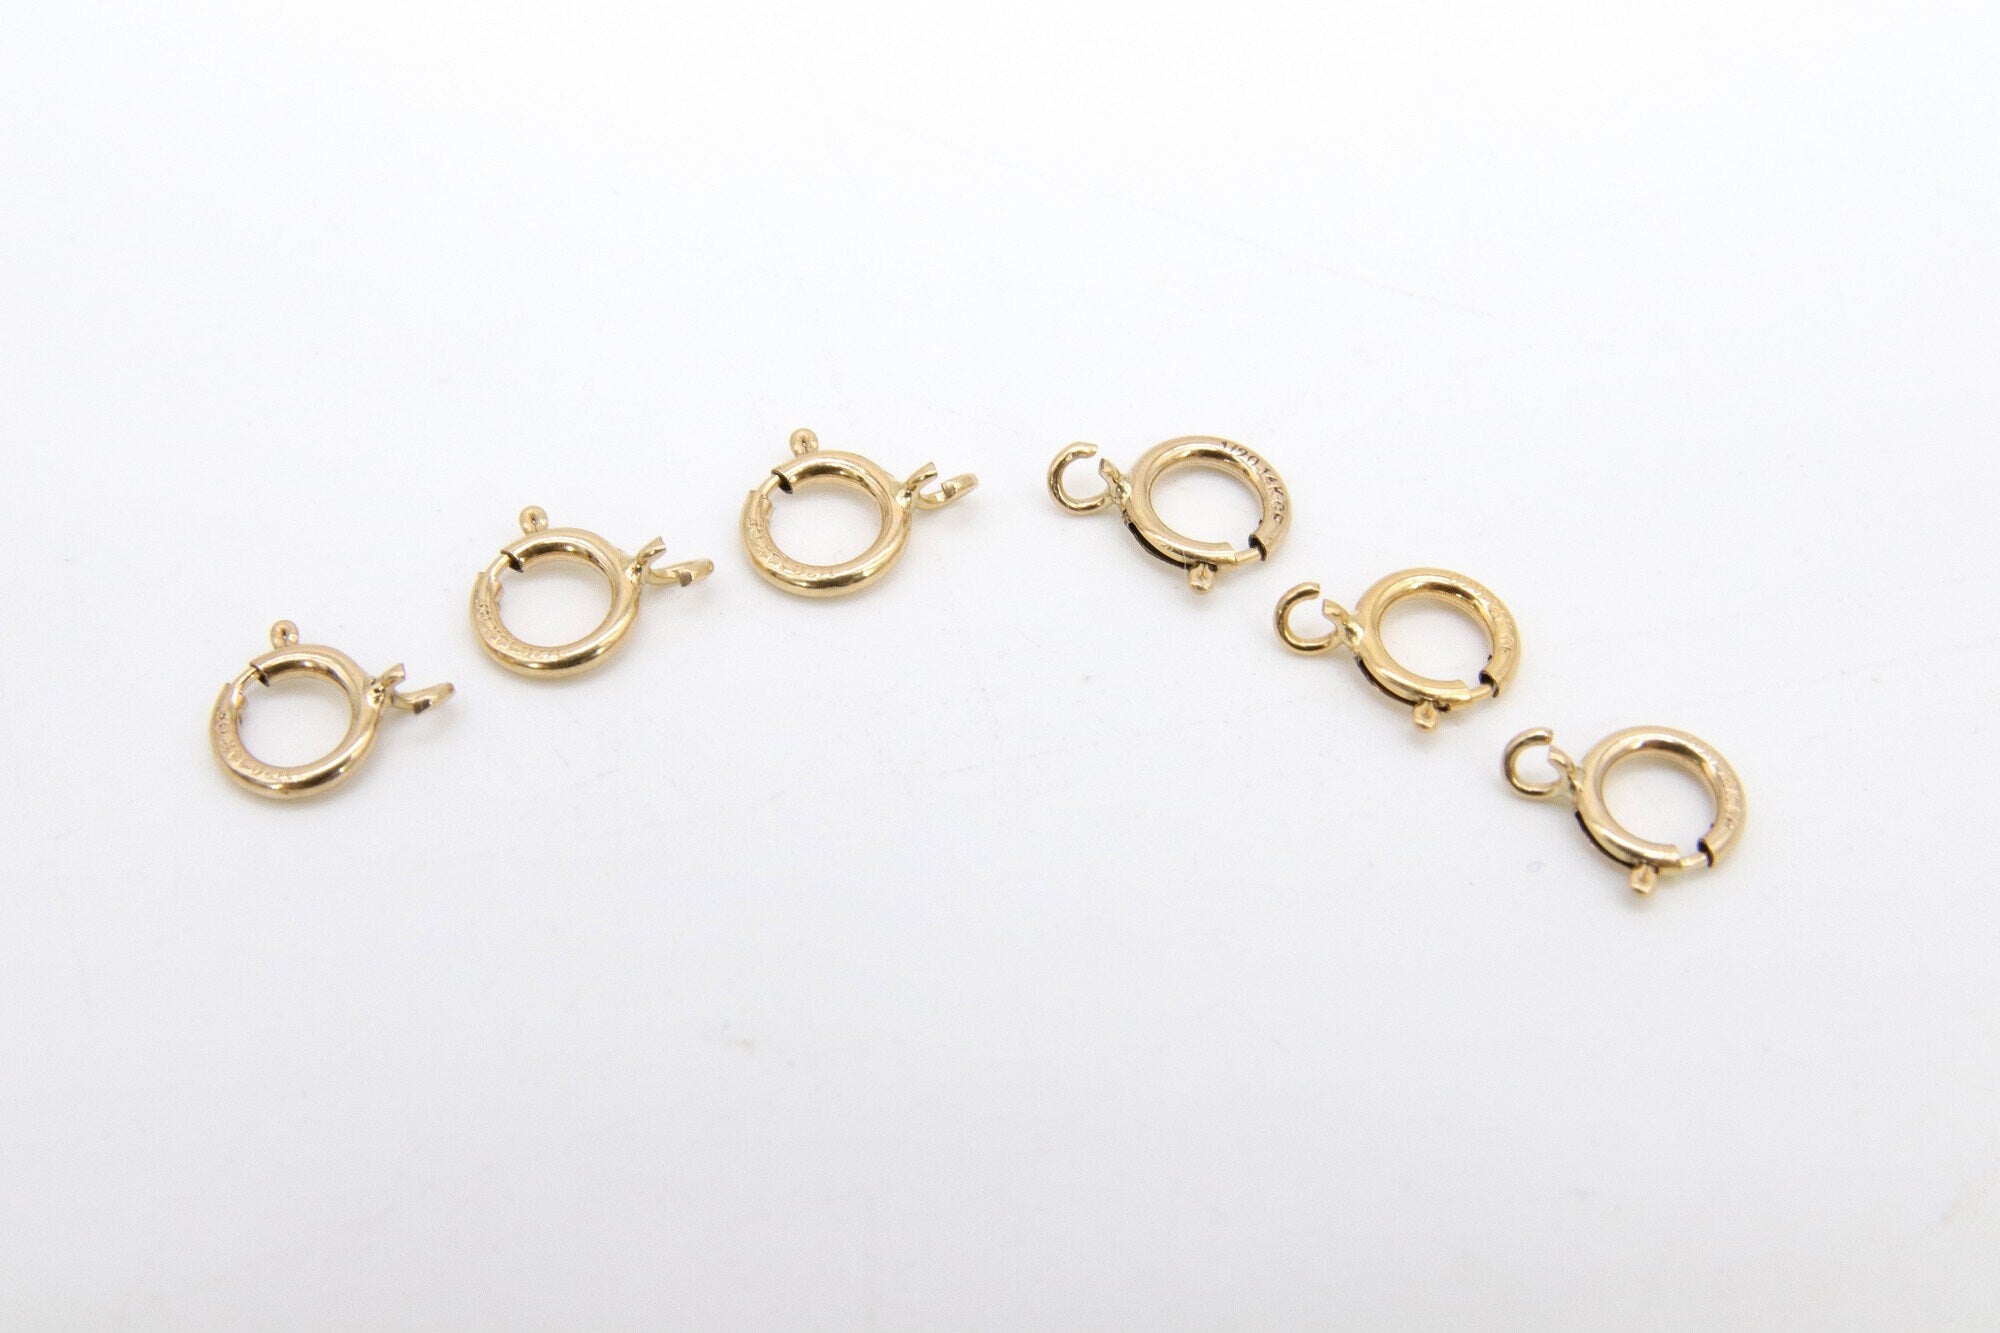 14 K Gold Filled Spring Ring Clasps, 6.0 mm Jewelry Findings #2118, Stamped 14 20 with Open Loop